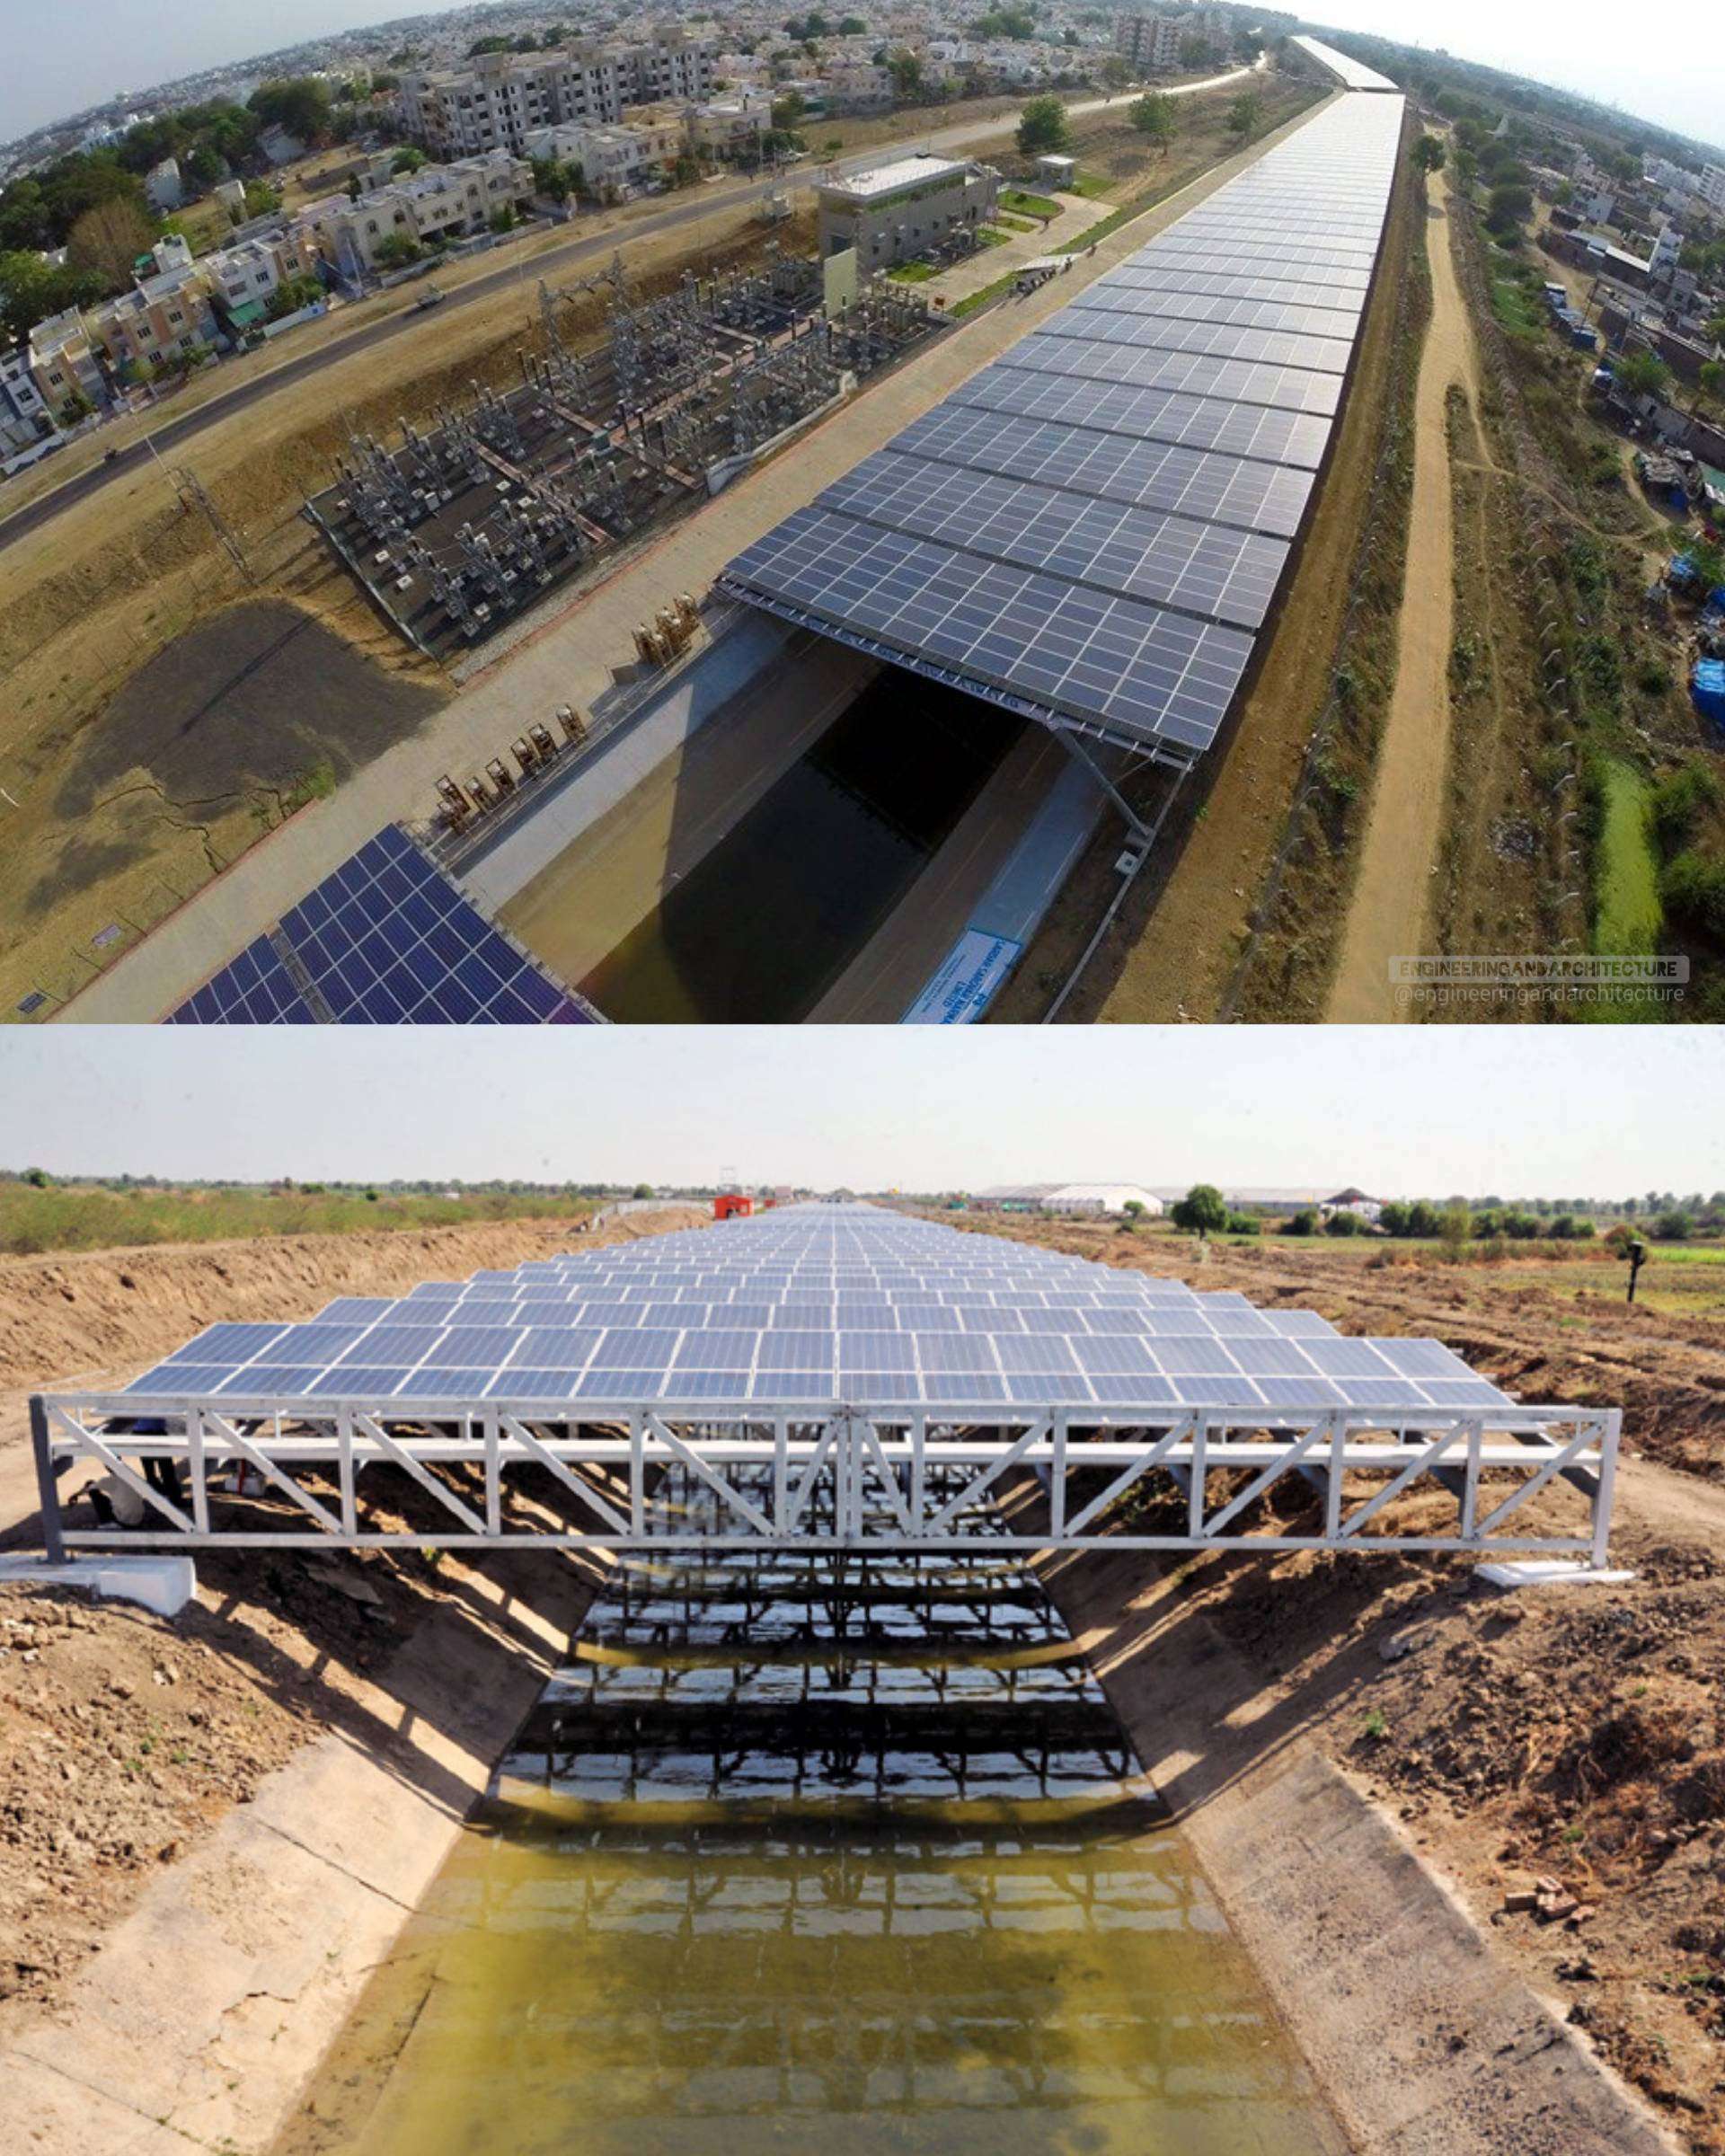 image showing Solar panels being integrated into canals in India giving us Solar canals. it helps with evaporative losses, doesn't use extra land and keeps solar panels cooler.